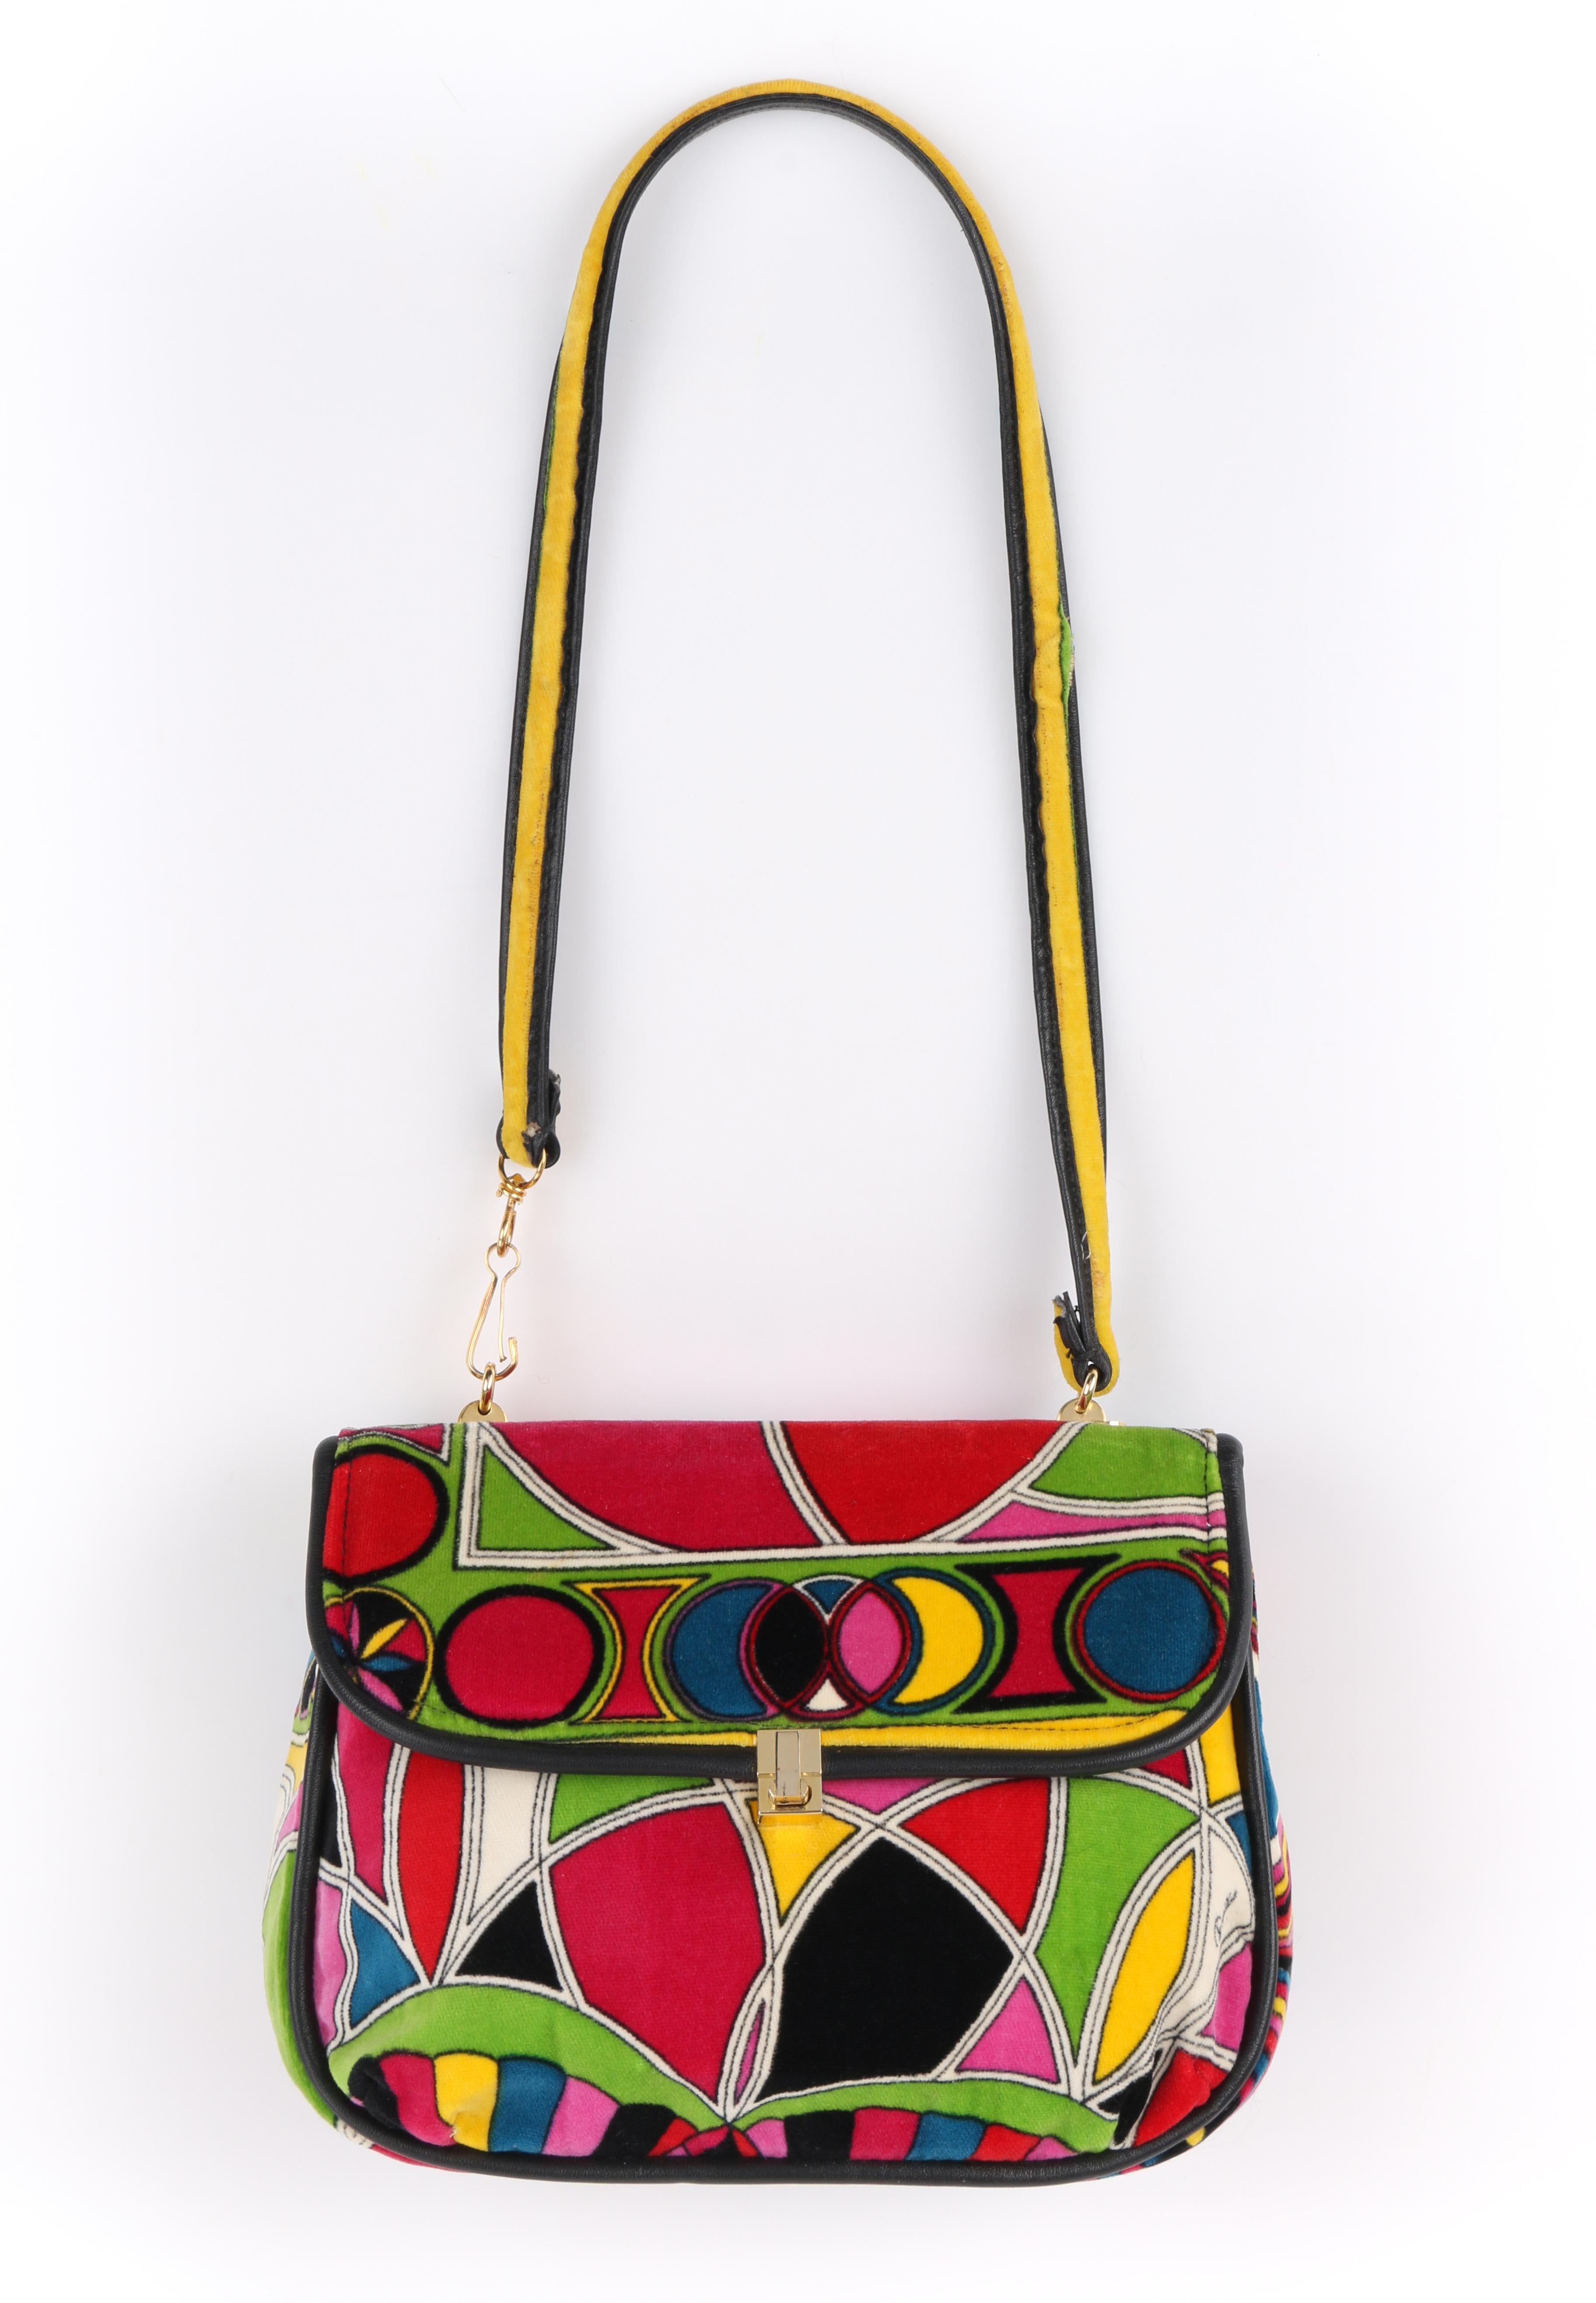 DESCRIPTION:  EMILIO PUCCI By Jana c.1960's Stained Glass Signature Print Velvet Flap Top Purse
 
Circa: c.1960’s
Label(s): Emilio Pucci Bags By Jana
Designer: Emilio Pucci
Style: Flap top purse
Color(s): Multi
Lined: Yes
Marked Fabric Content: